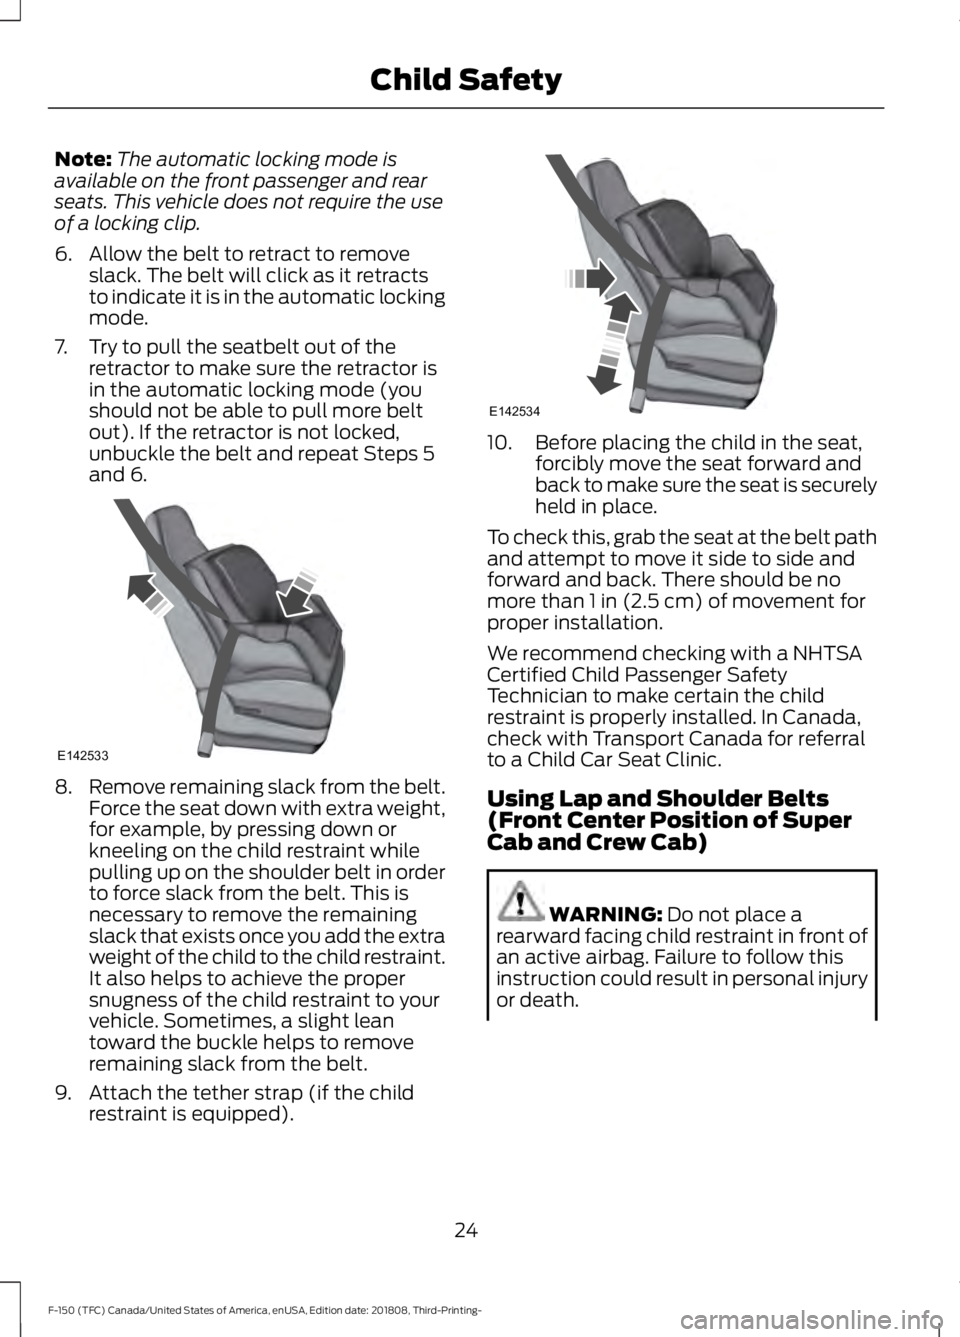 FORD F-150 2019  Owners Manual Note:
The automatic locking mode is
available on the front passenger and rear
seats. This vehicle does not require the use
of a locking clip.
6. Allow the belt to retract to remove slack. The belt wil